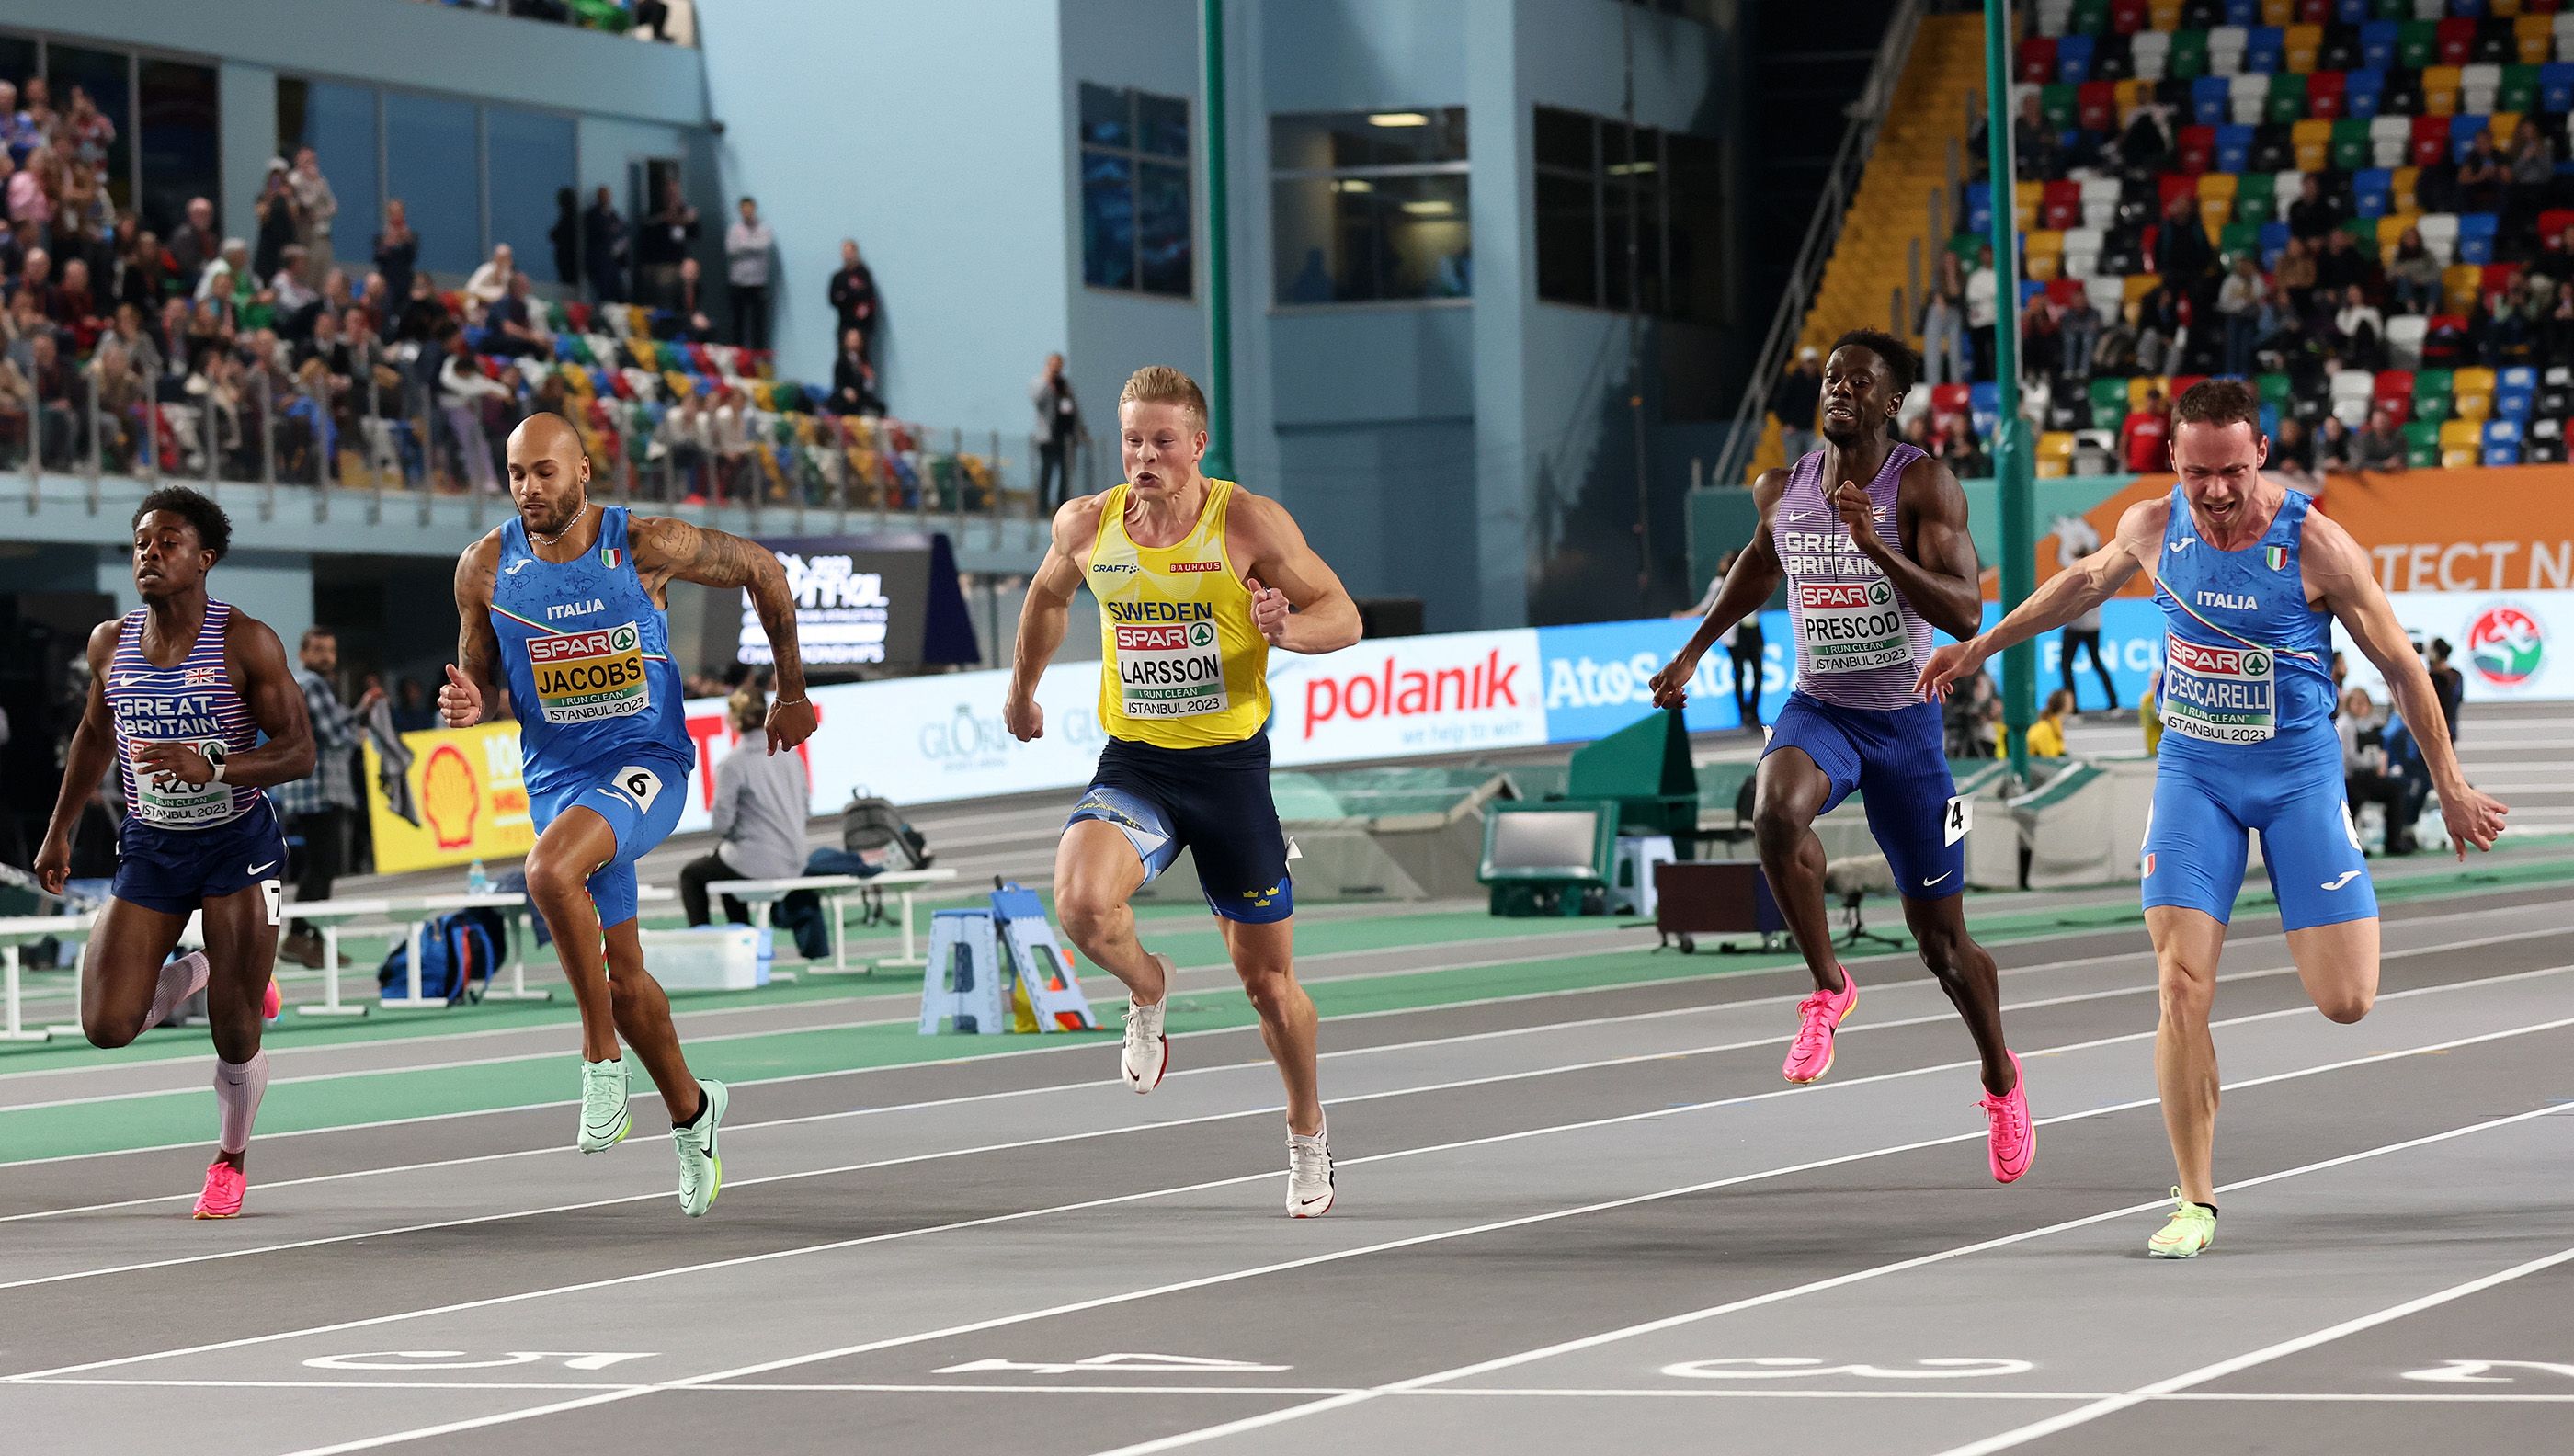 Athletes fight for the line in the men's European indoor 60m final, won by Samuele Ceccarelli